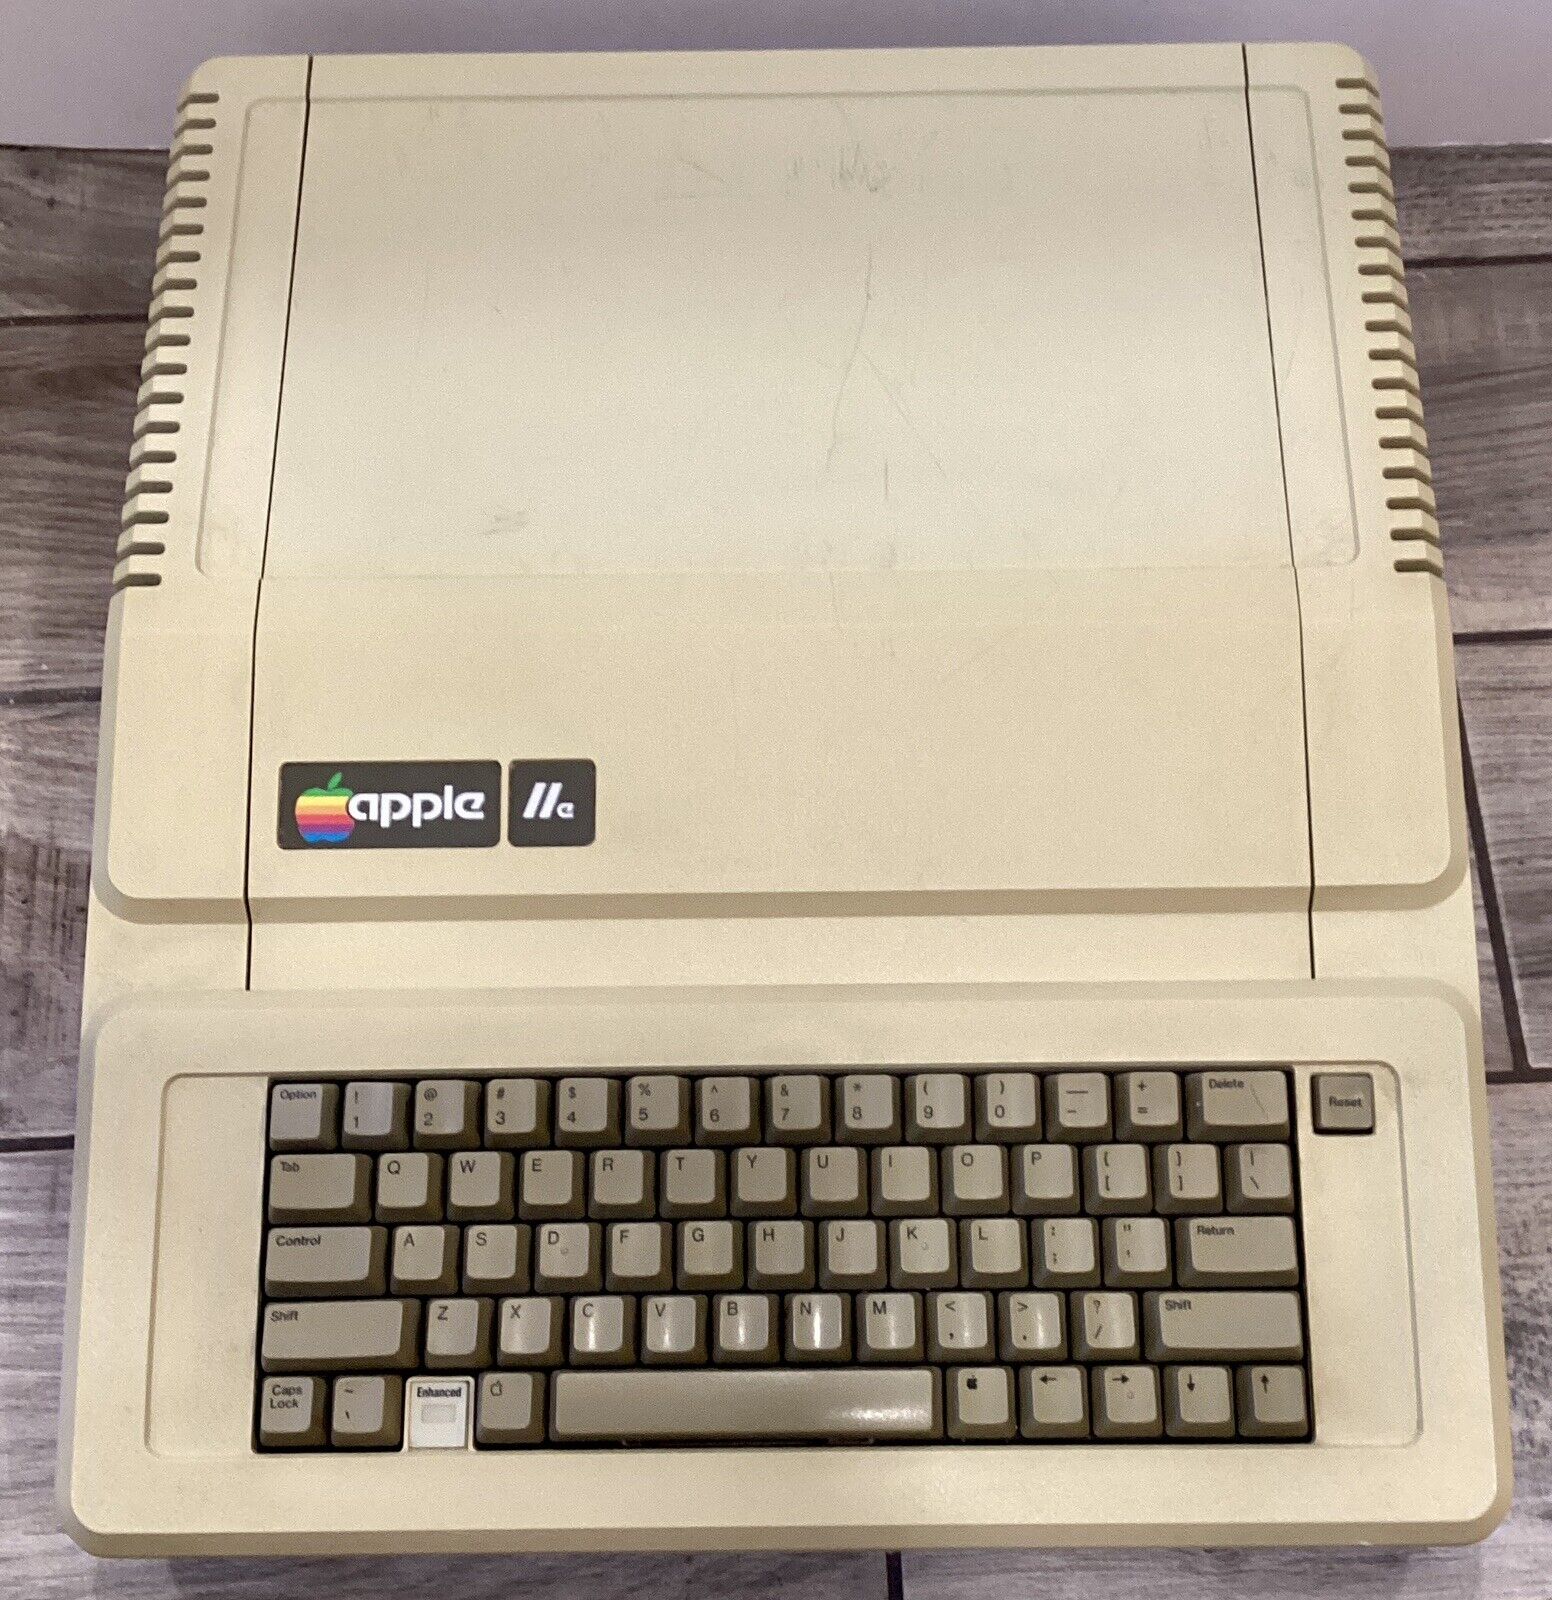 Apple IIe Vintage Computer - Tested For Power